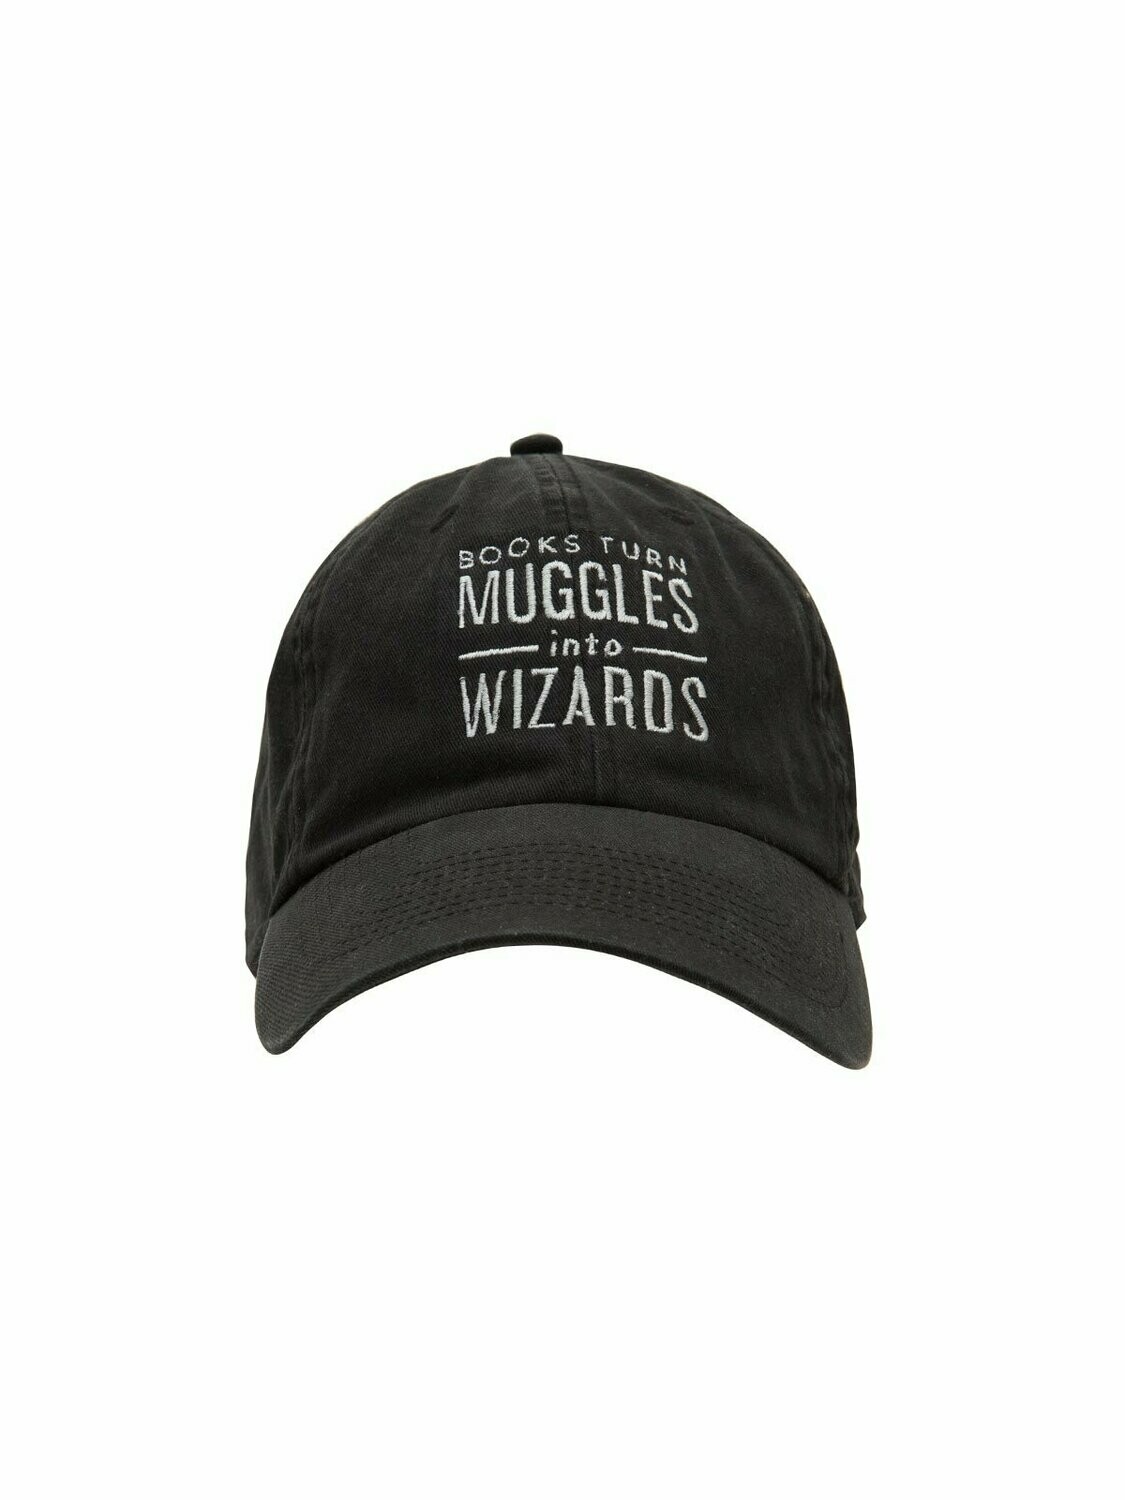 Books Turn Muggles into Wizards cap